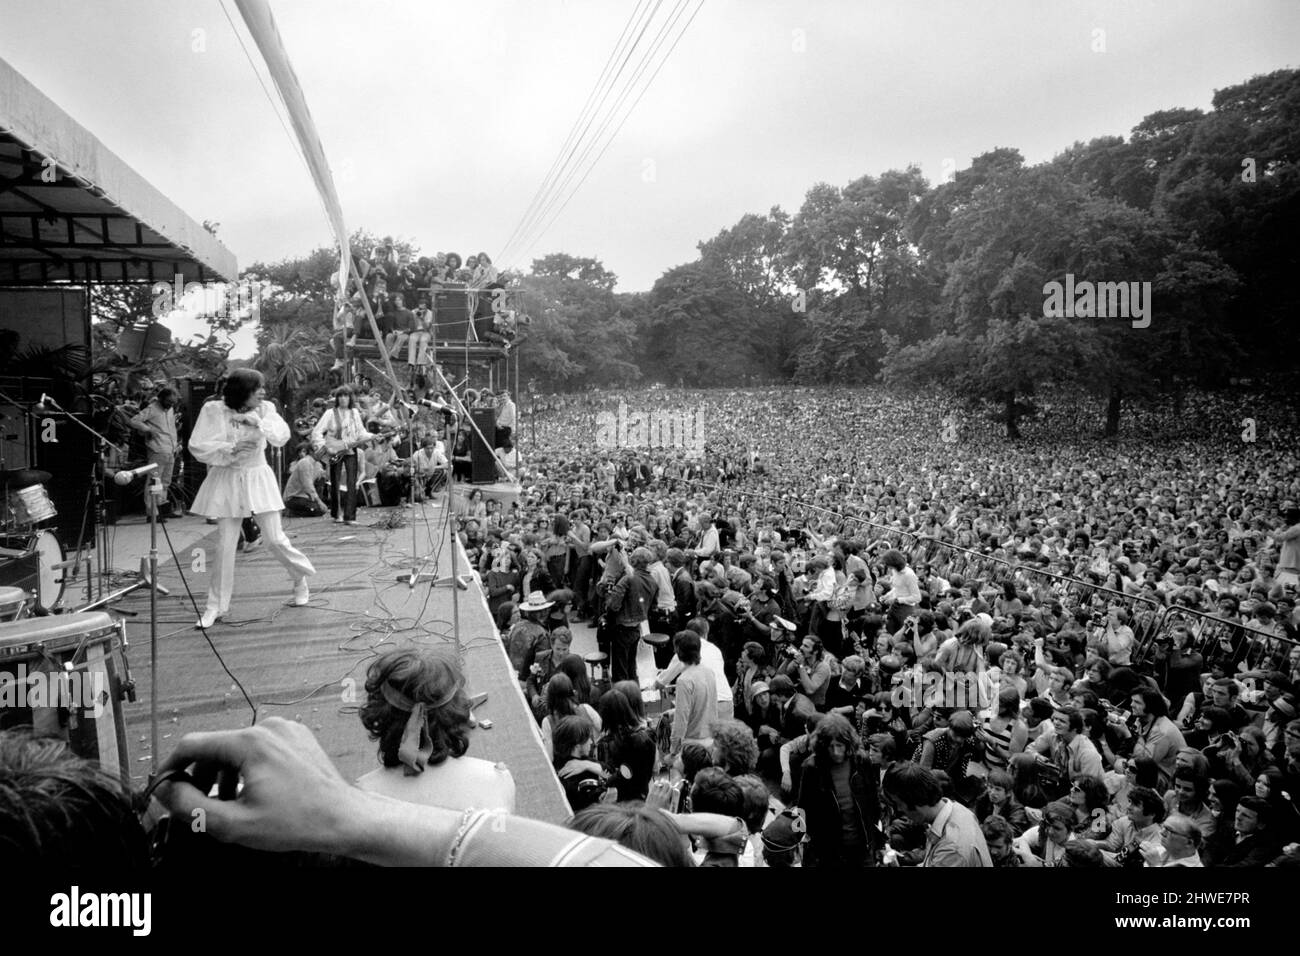 The Rolling Stones on stage at their free concert in London's Hyde Park on  5 July 1969 Stock Photo - Alamy